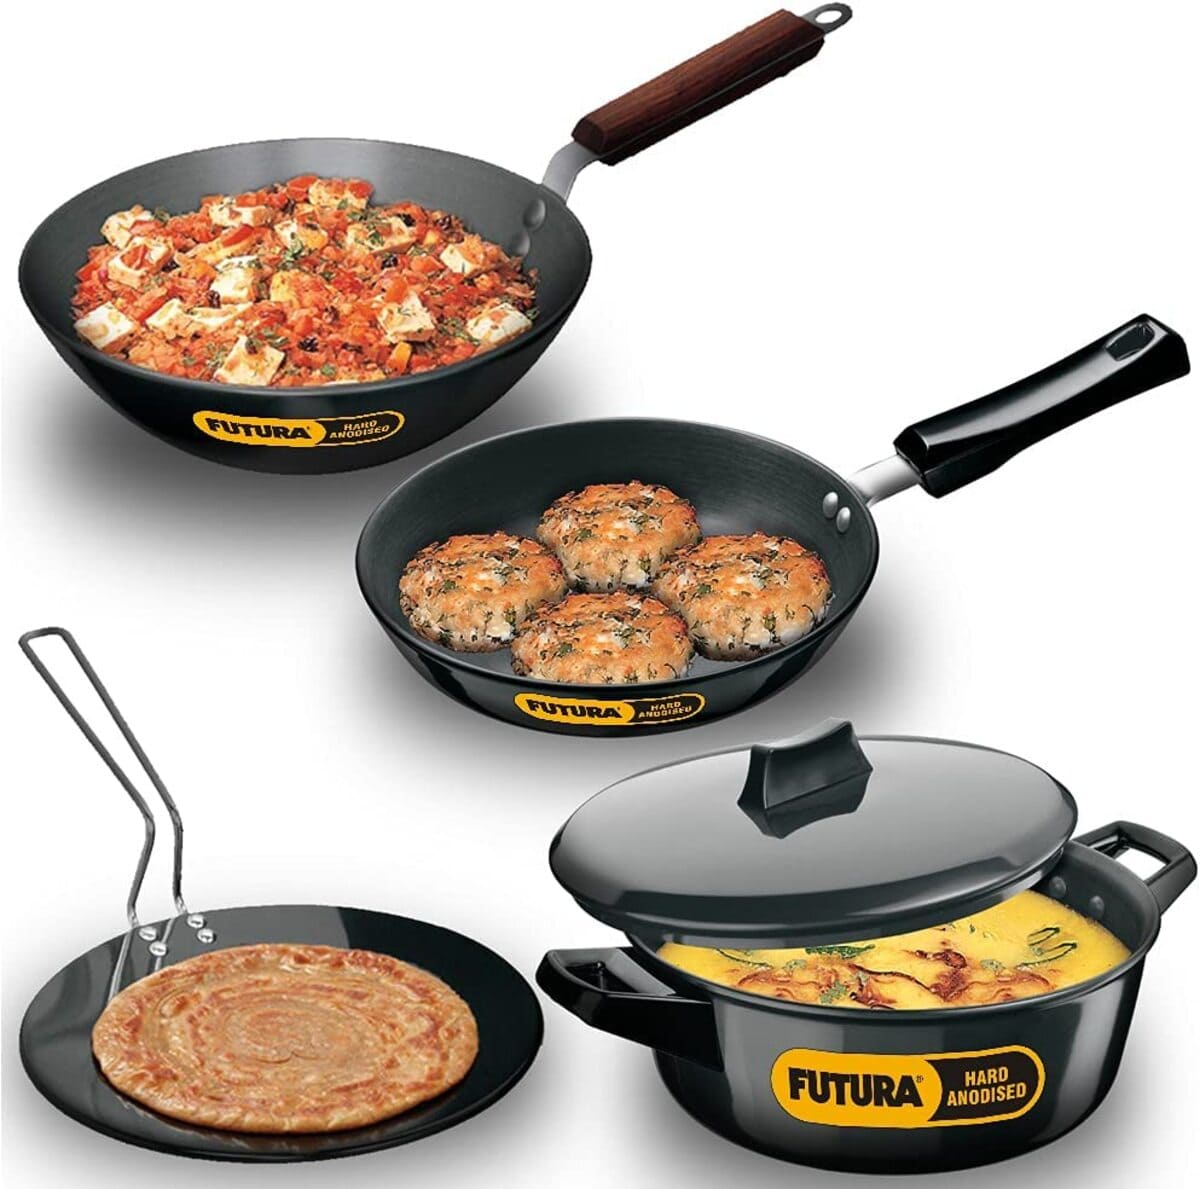 Is Hard Anodized Cookware Safe For Birds